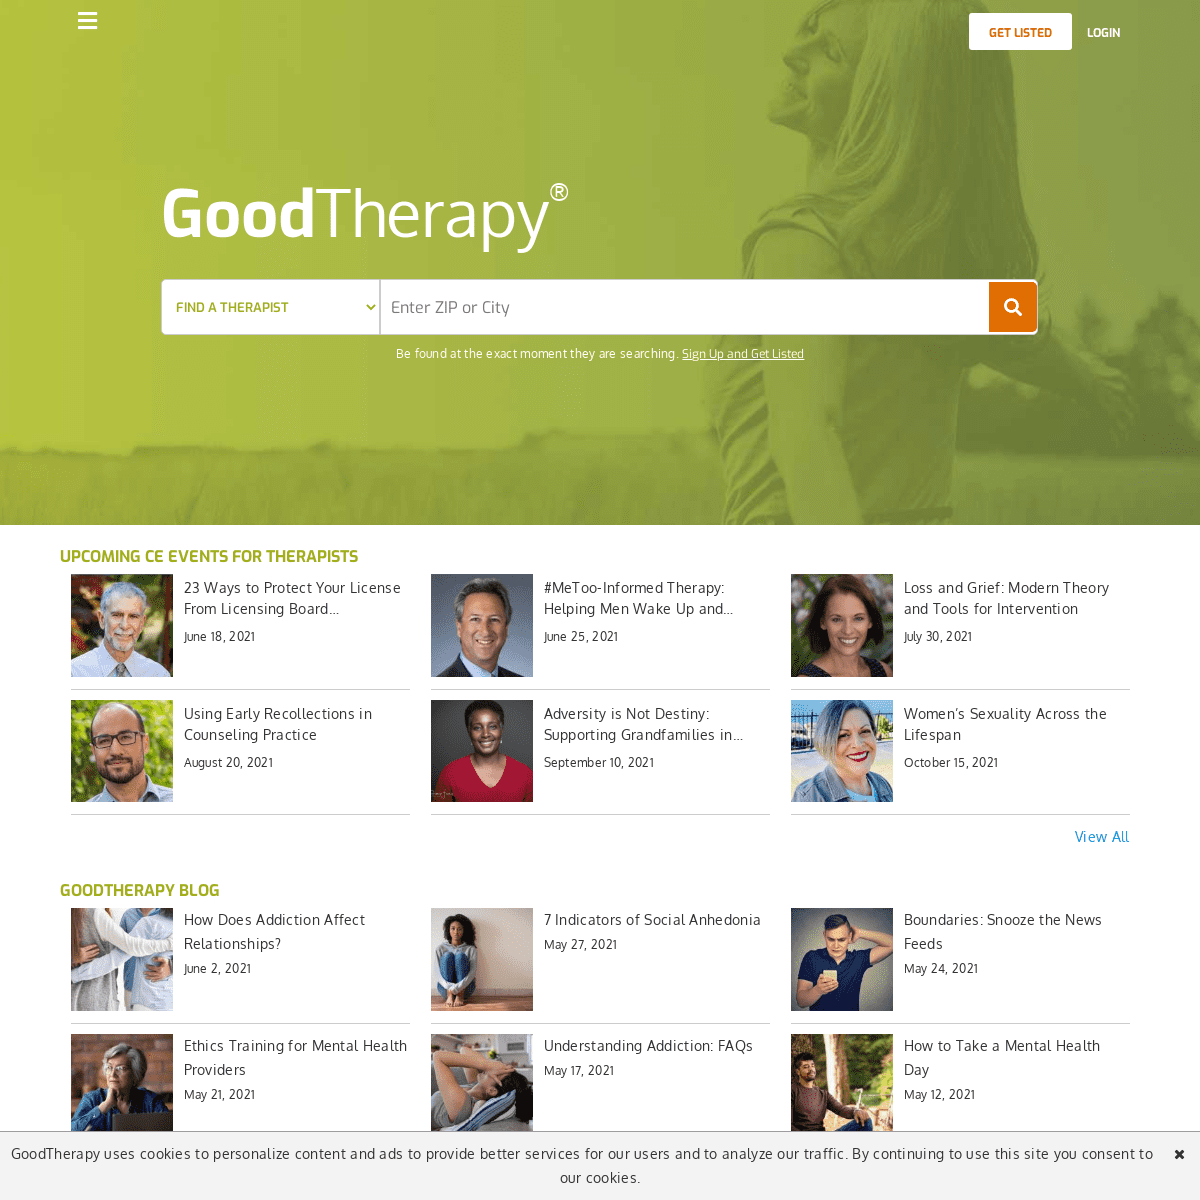 A complete backup of https://goodtherapy.org